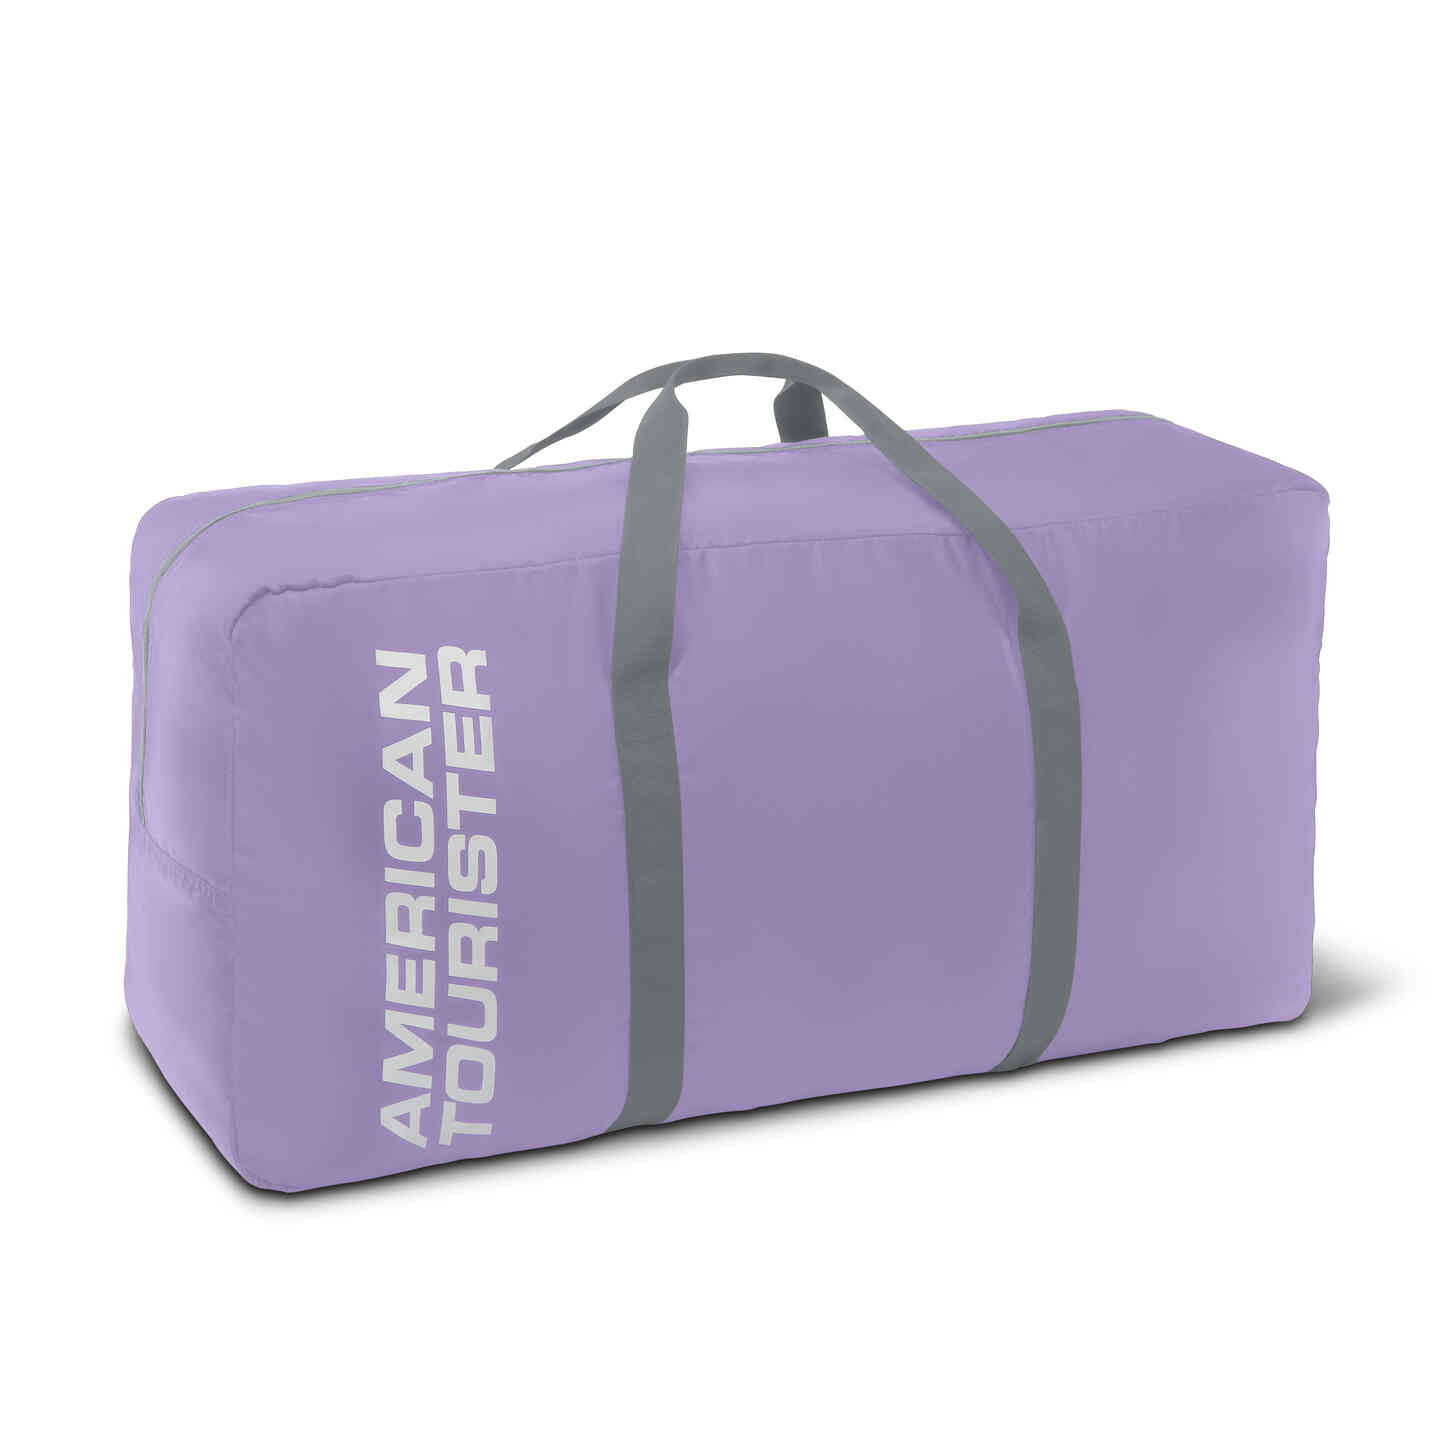 Need a bigger bag? The American Tourister Tote-a-Fun duffel gives you just that. Click here to shop now.